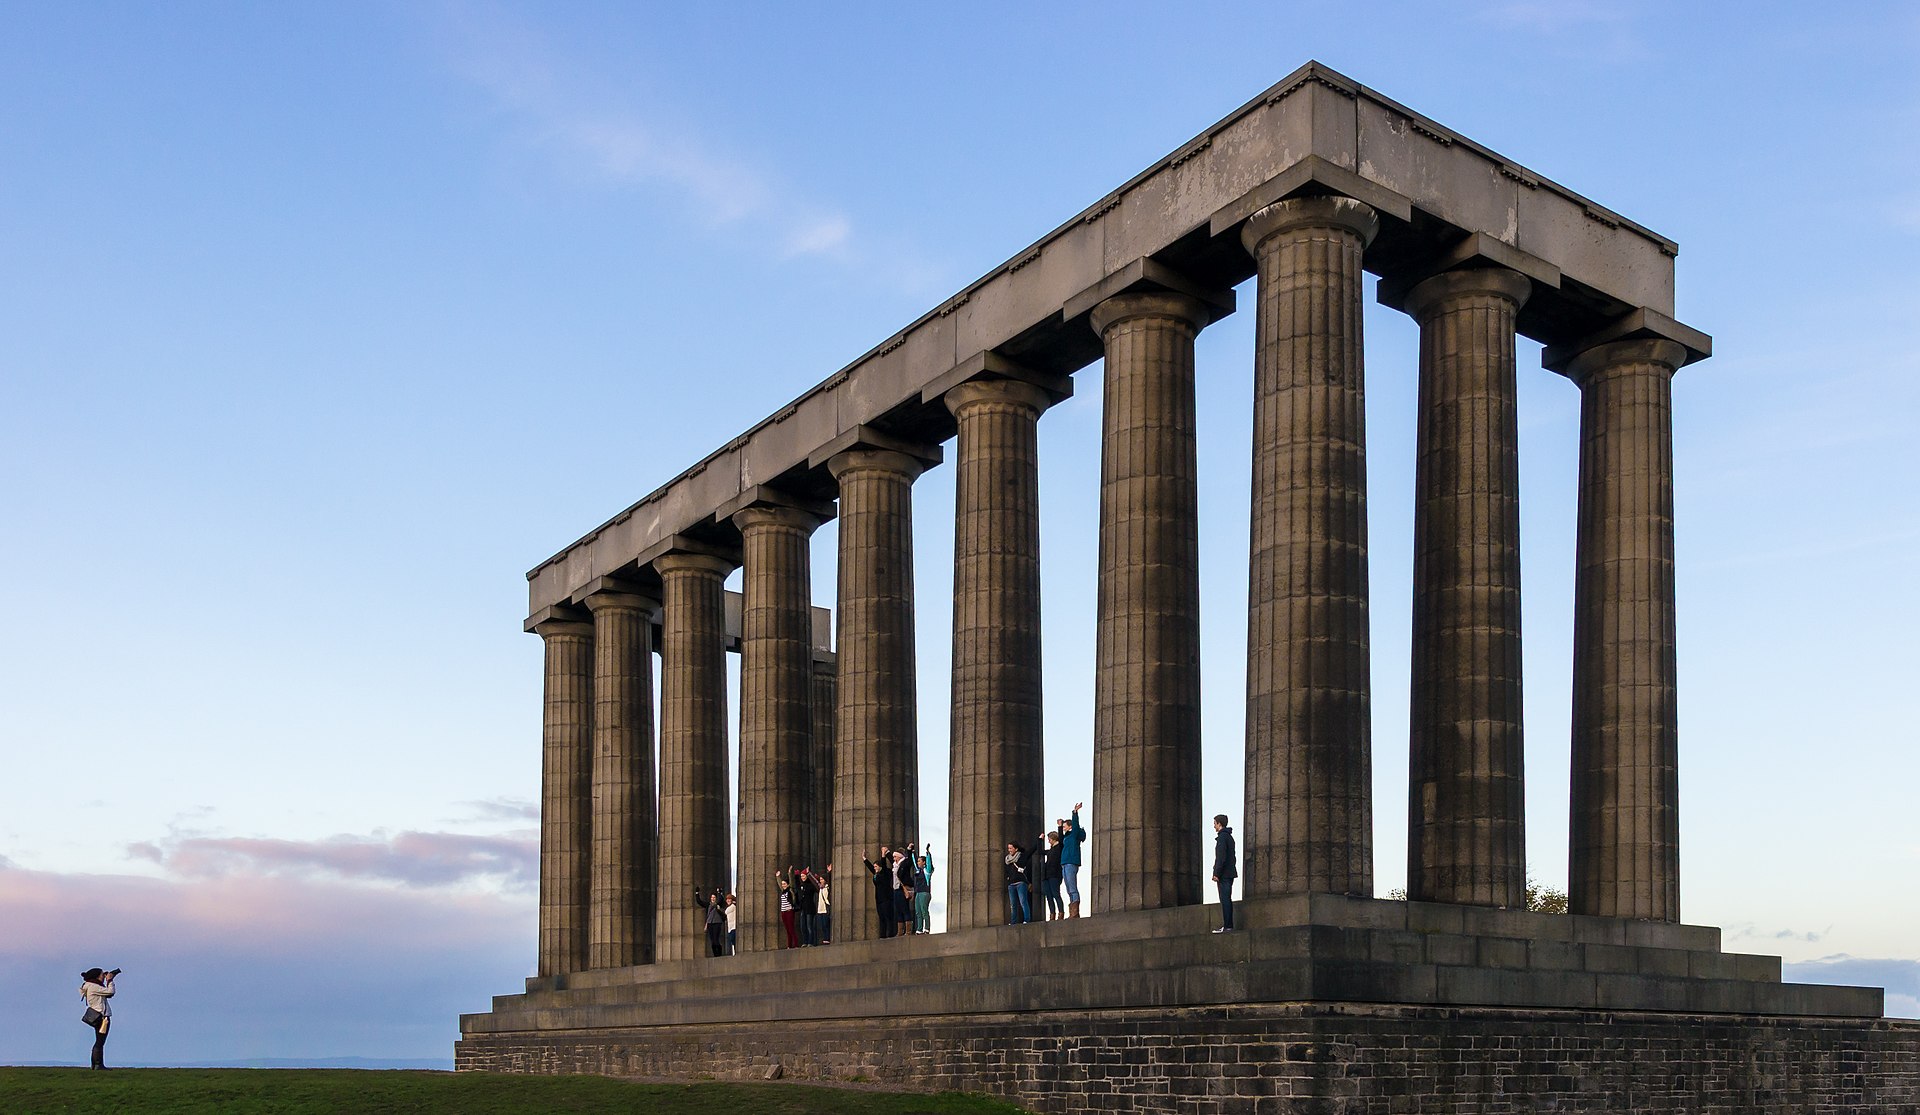 National monument of Scotland - National Monument of Scotland